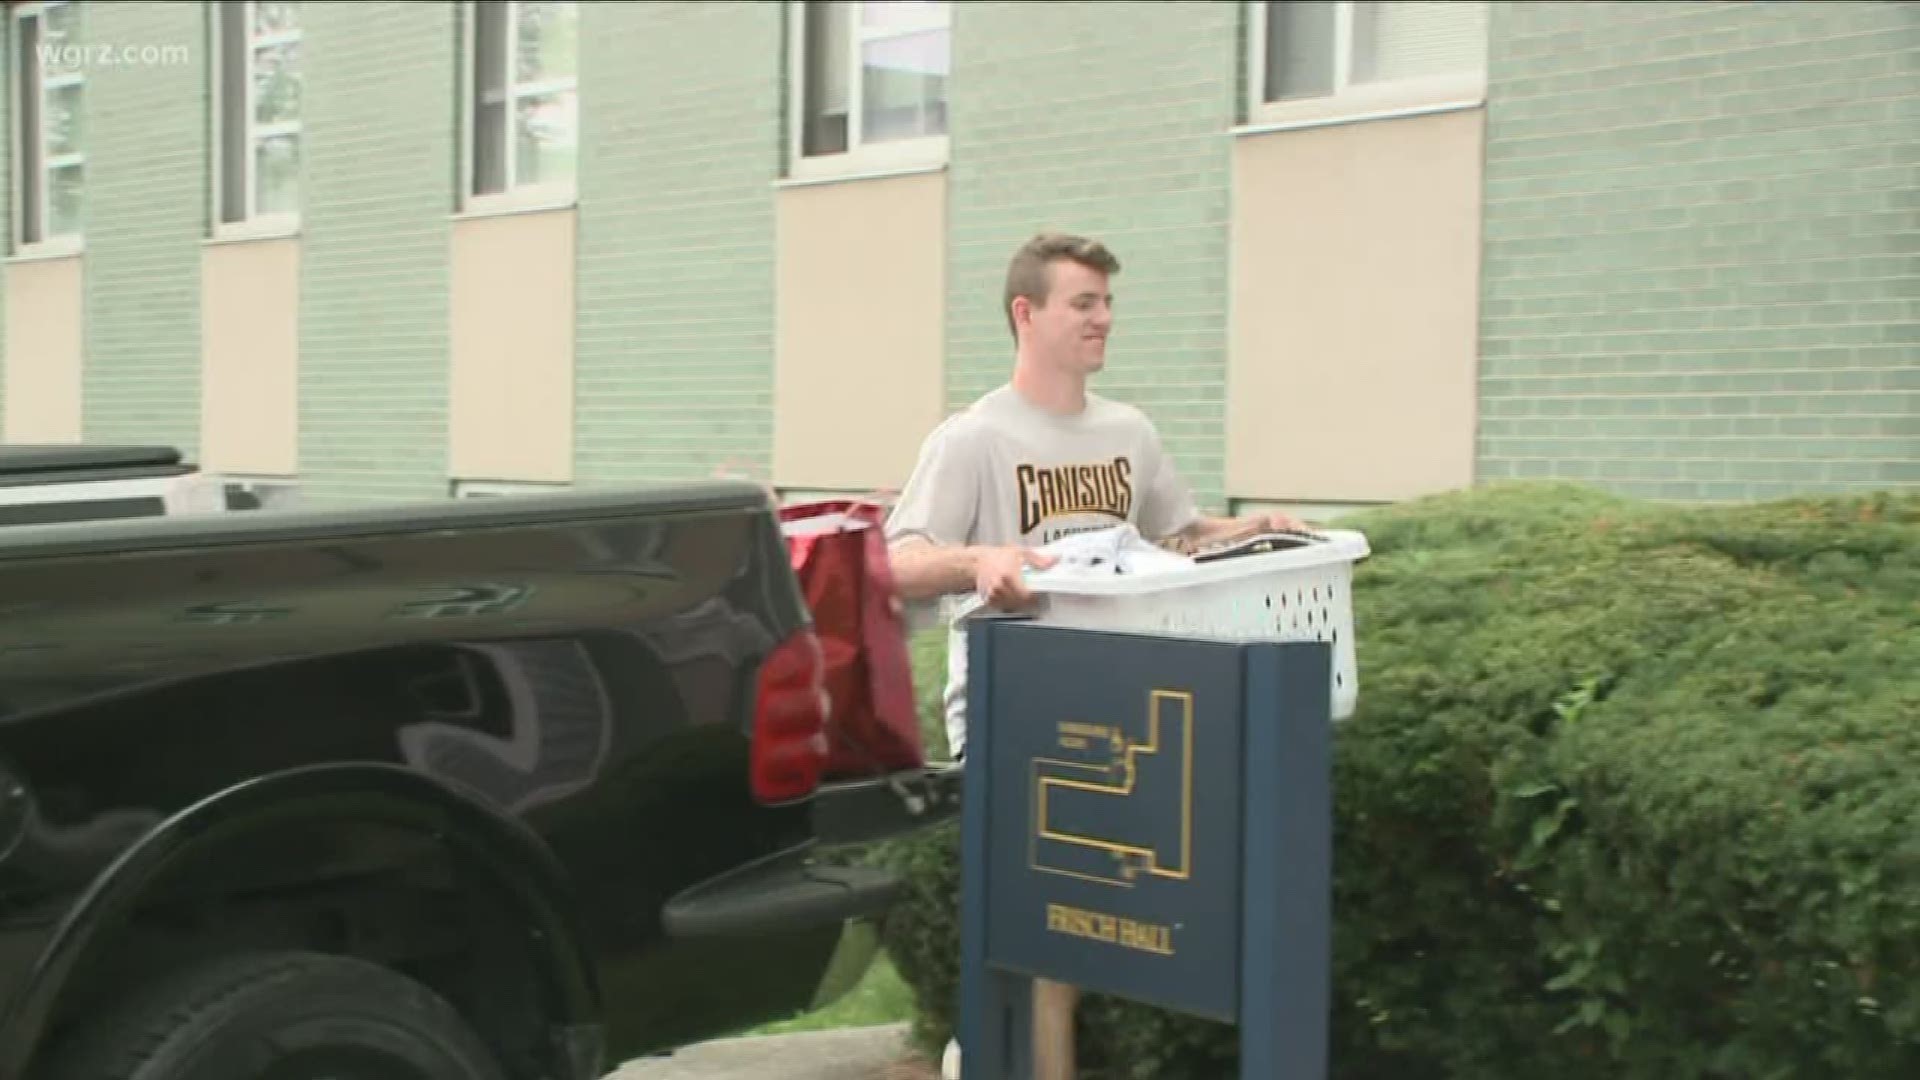 Move-in day at Canisius College